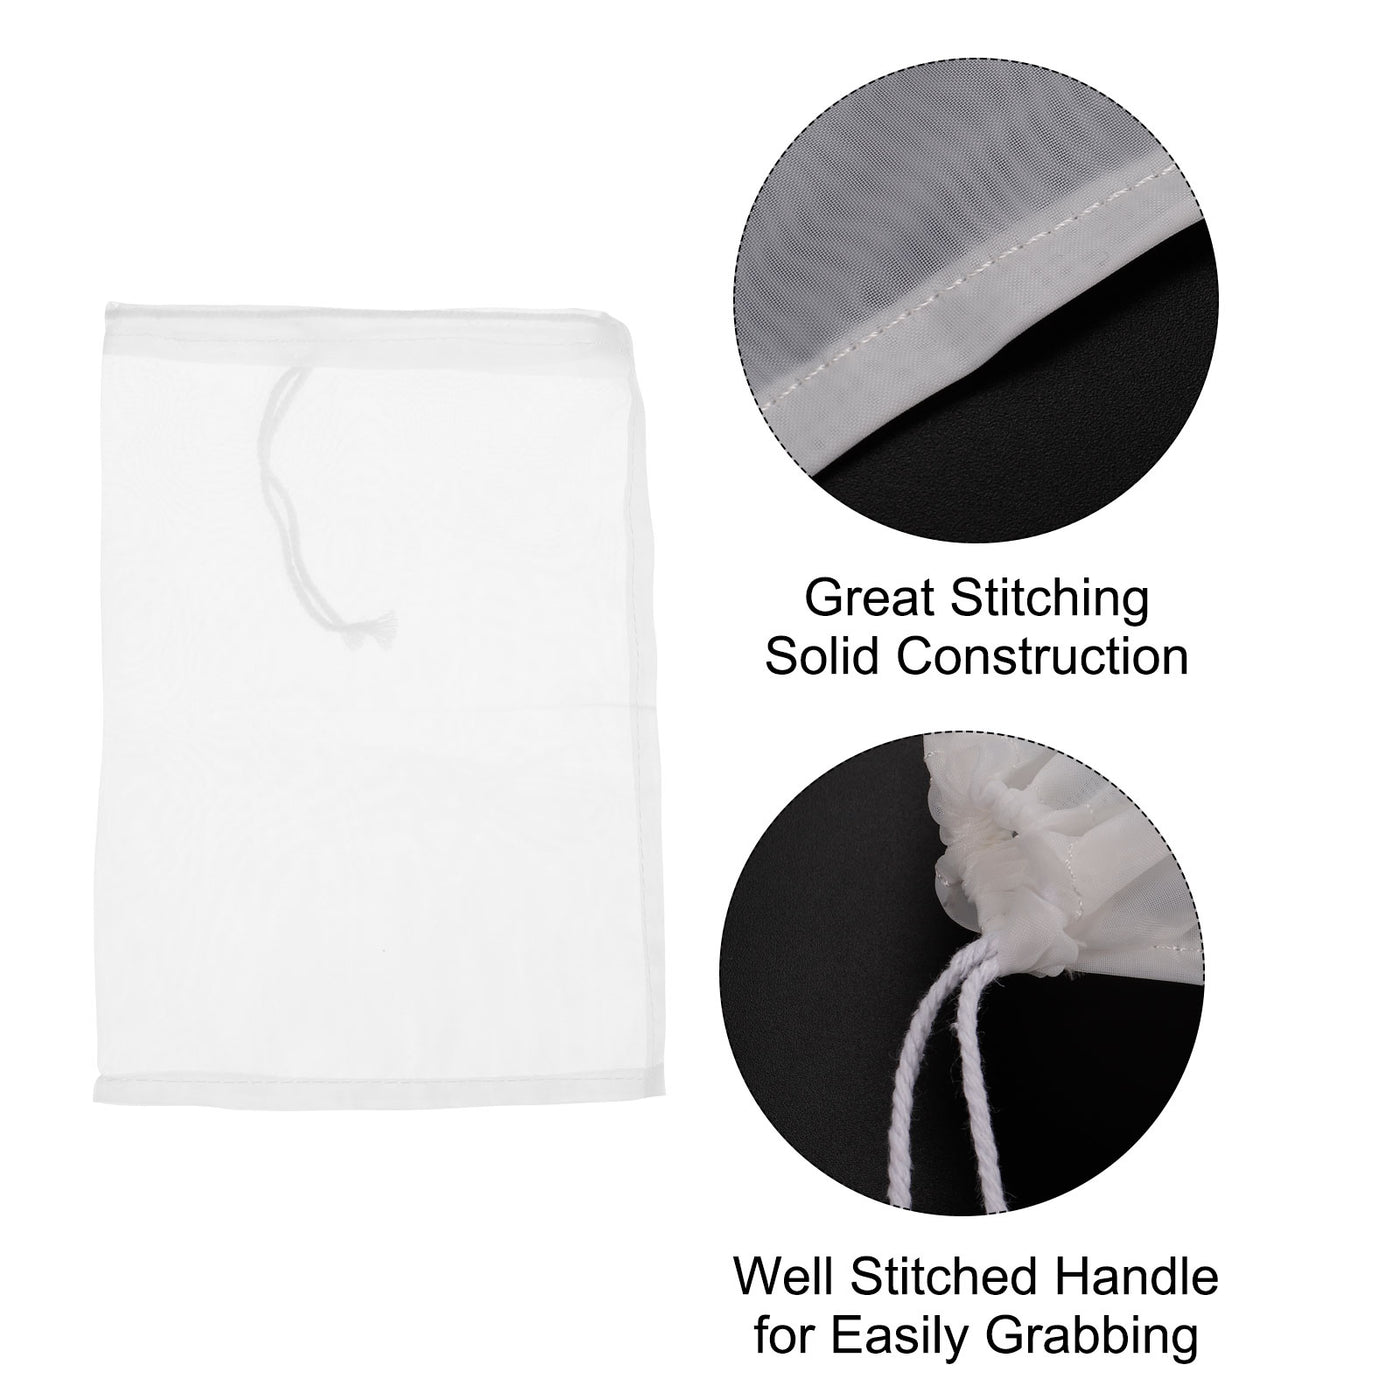 uxcell Uxcell Paint Filter Bag 150 Mesh (7.9"x5.9") Nylon Strainer for Filtering Paint